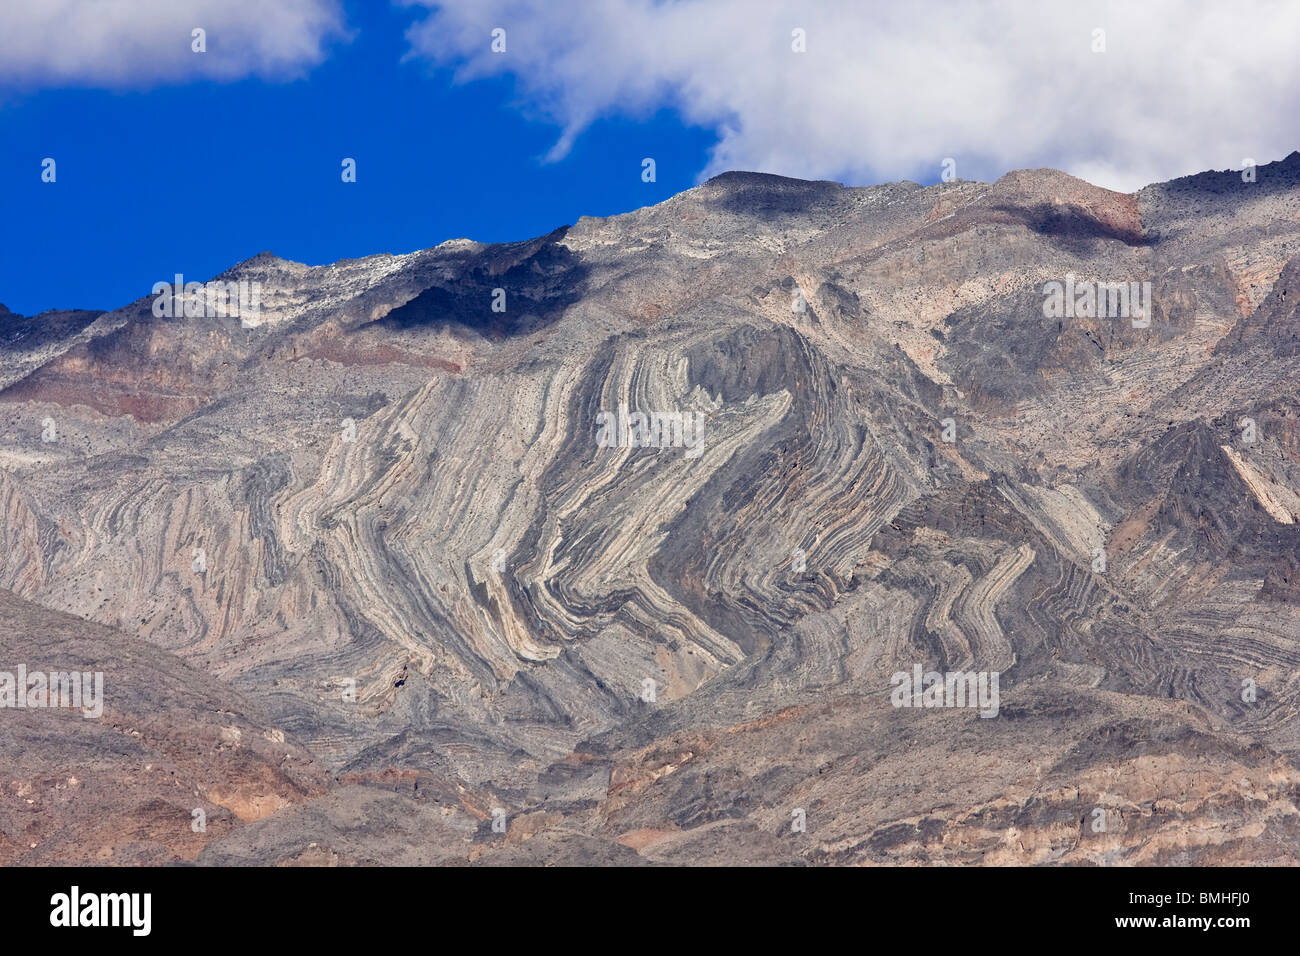 Interesting metamorphic rock patterns in the mountains at Death Valley National Park, California. Stock Photo